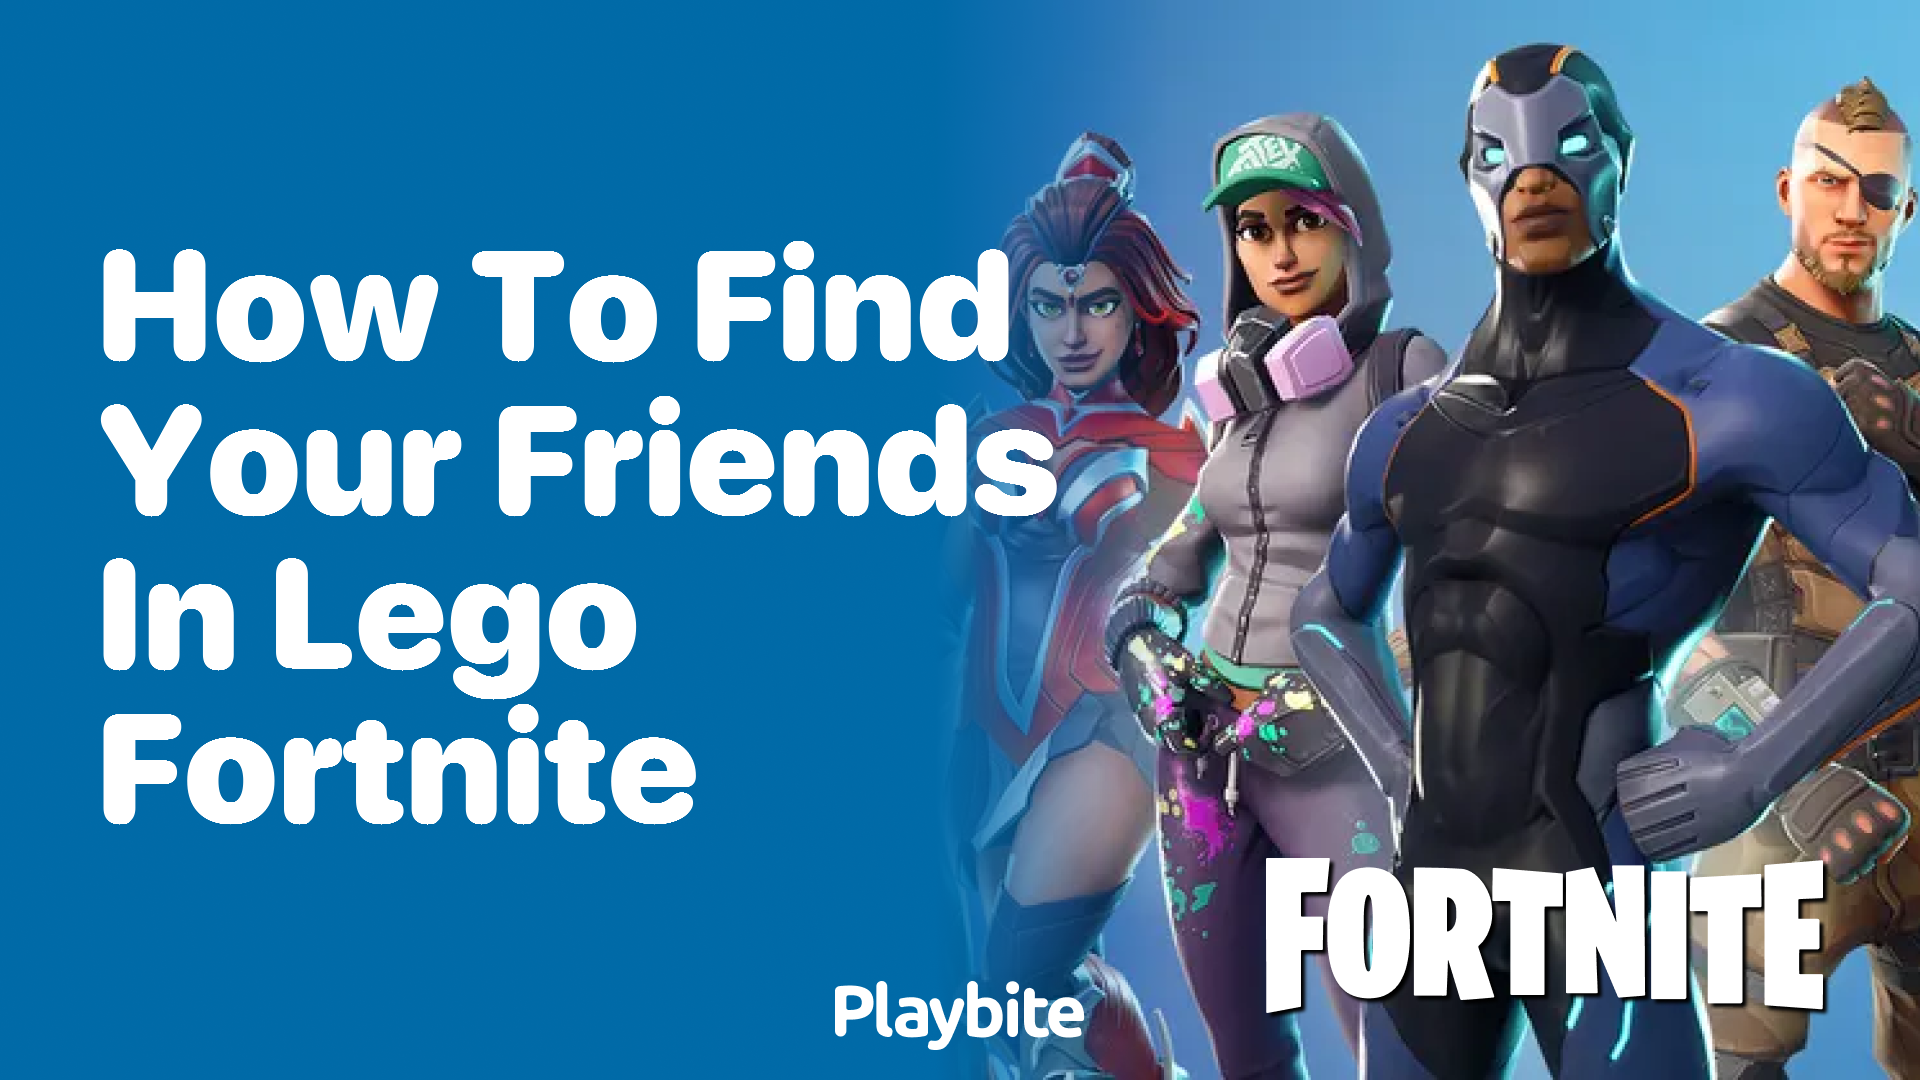 How to Find Your Friends in LEGO Fortnite